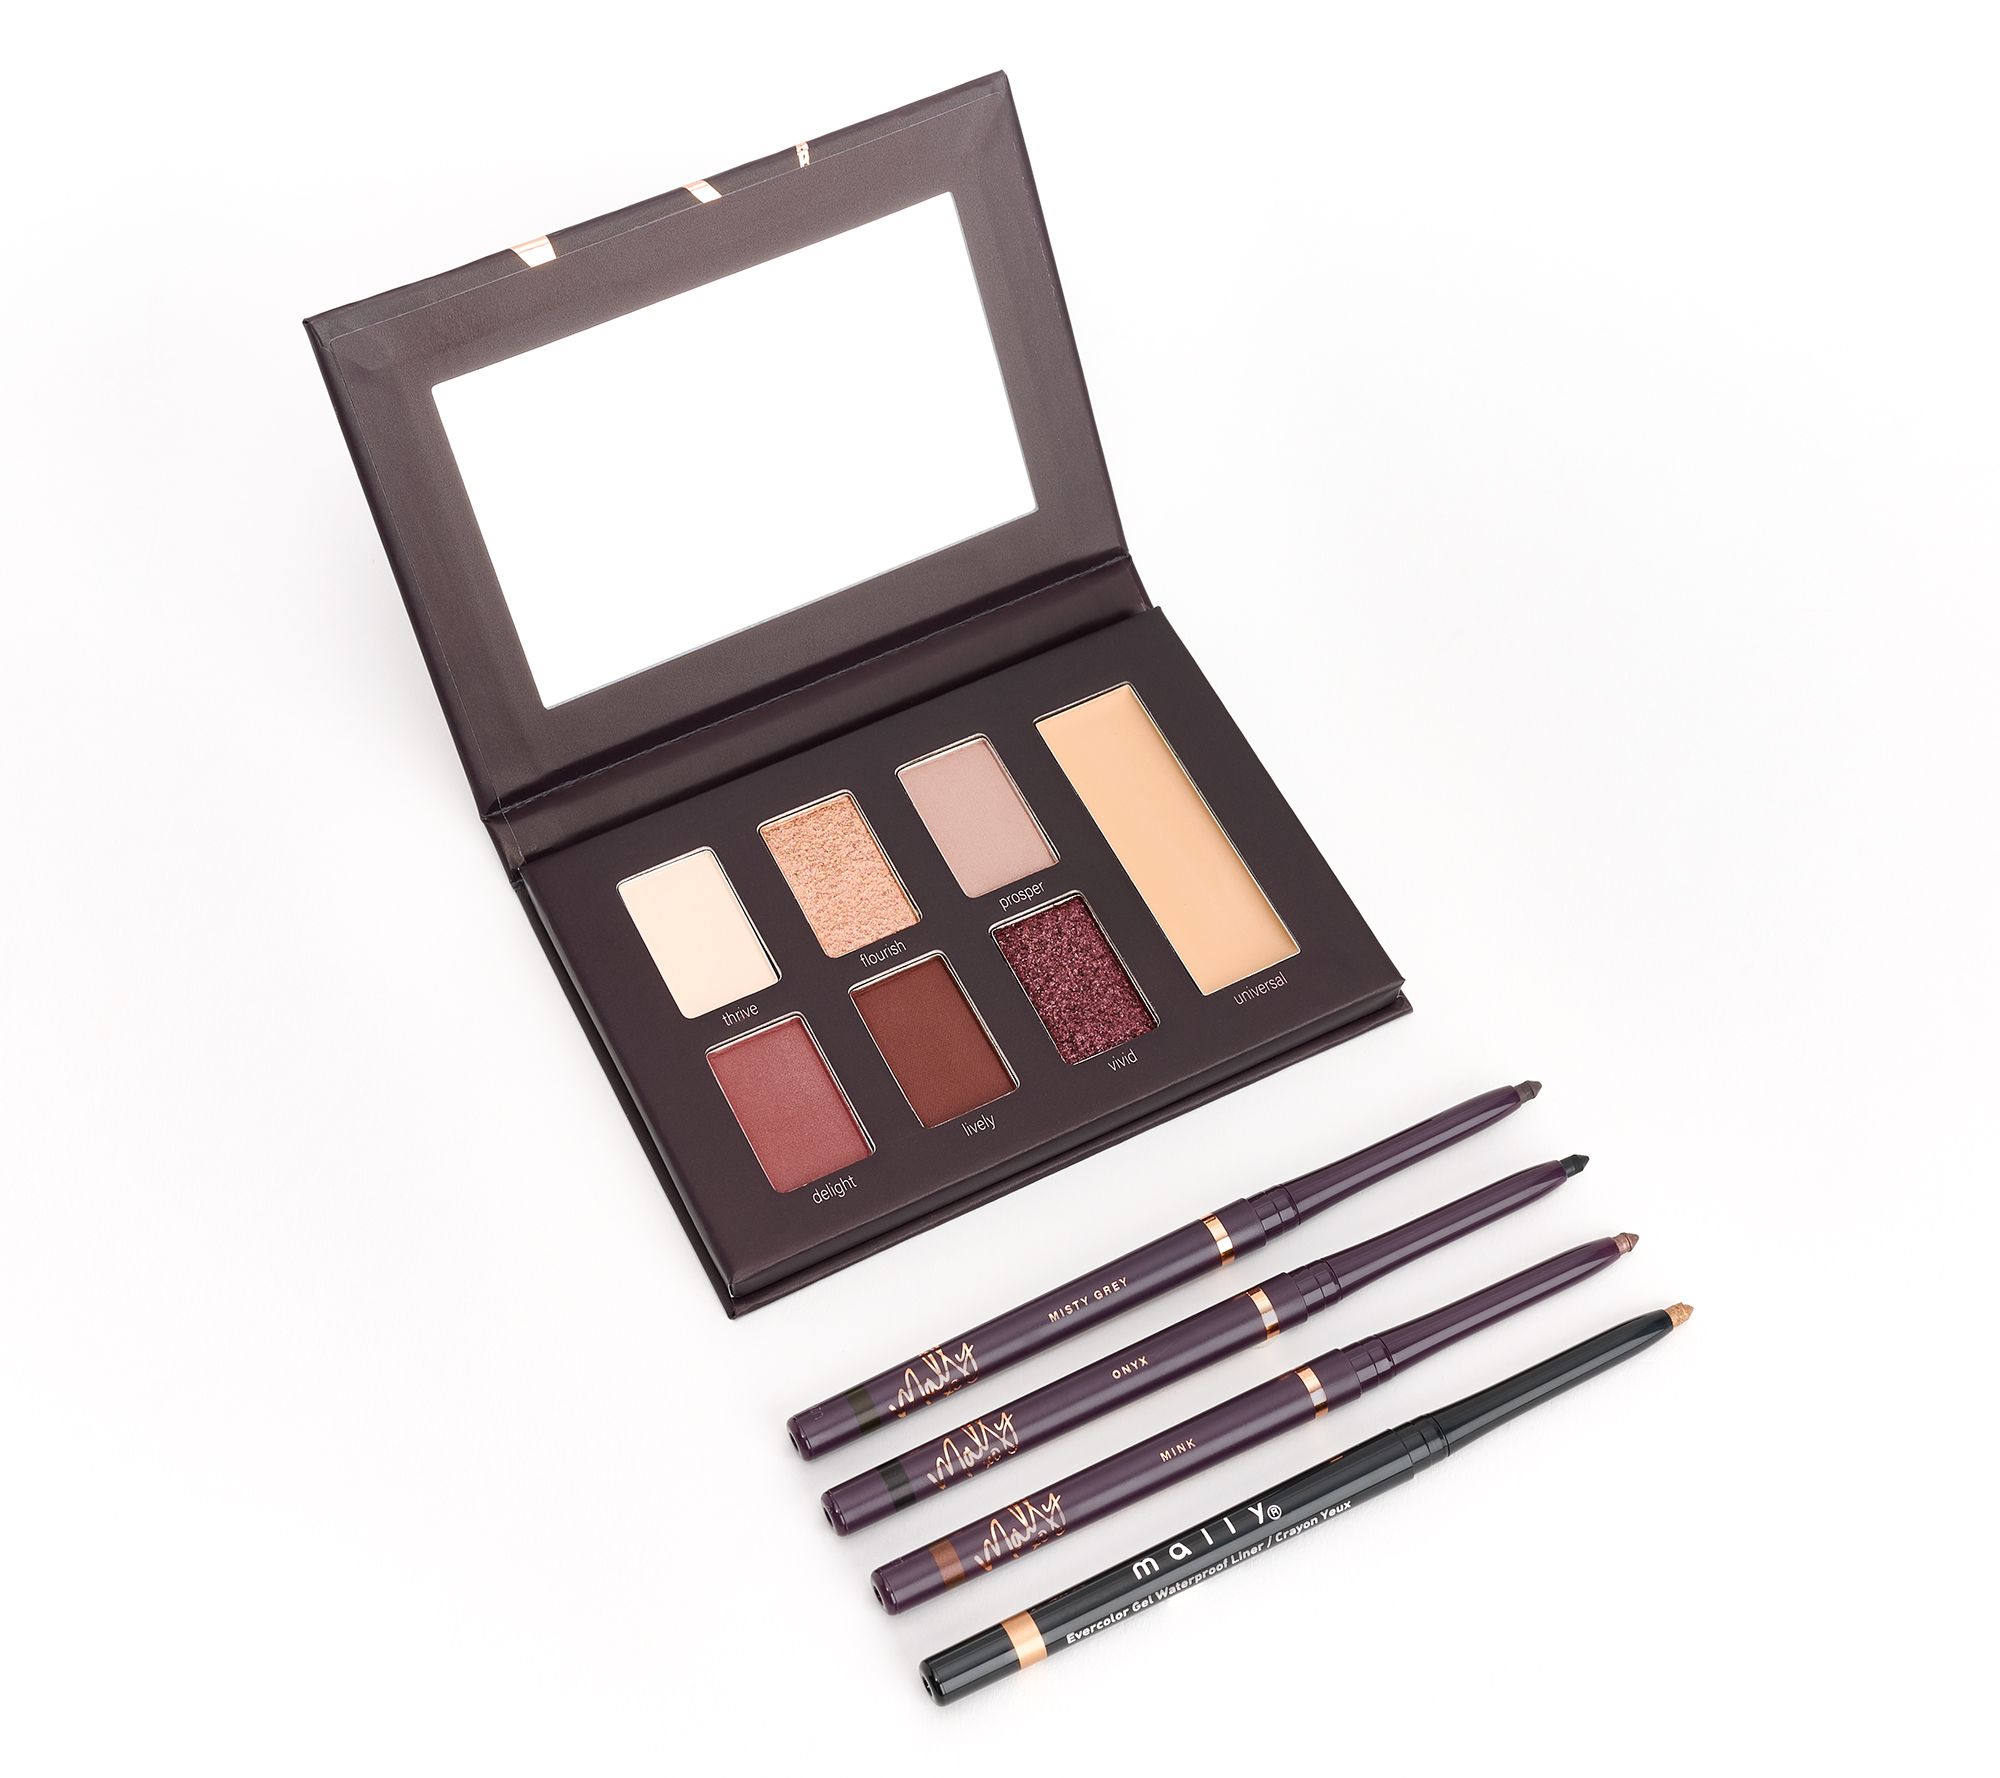 NEW! NakedS 12-Color MATTE Eye Shadow Palette (B) w/ Brush - FREE US  SHIPPING